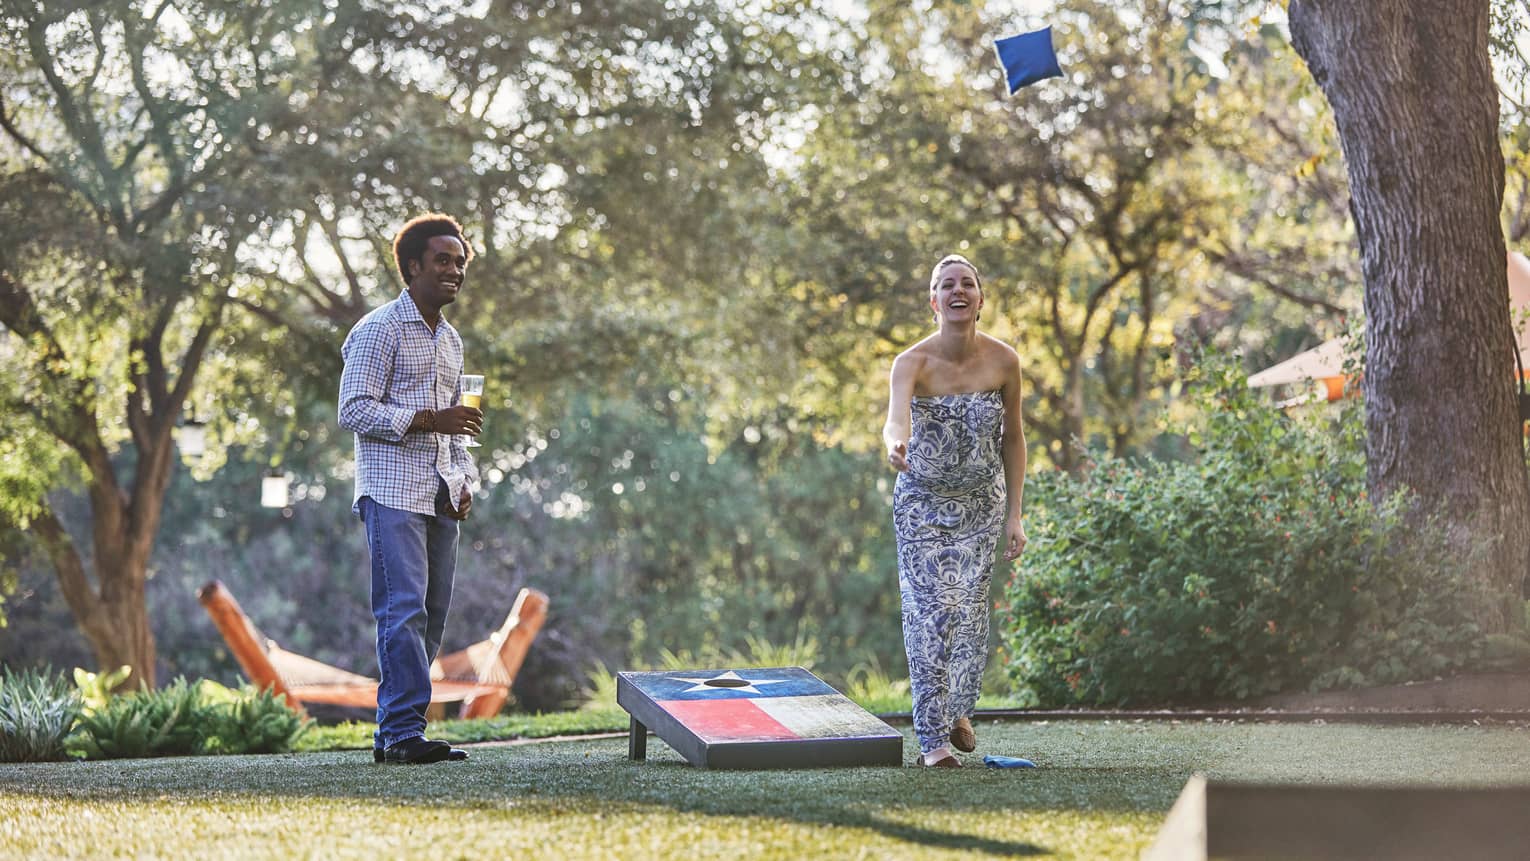 Laughing woman tosses bean bag on lawn, man holding beer watches